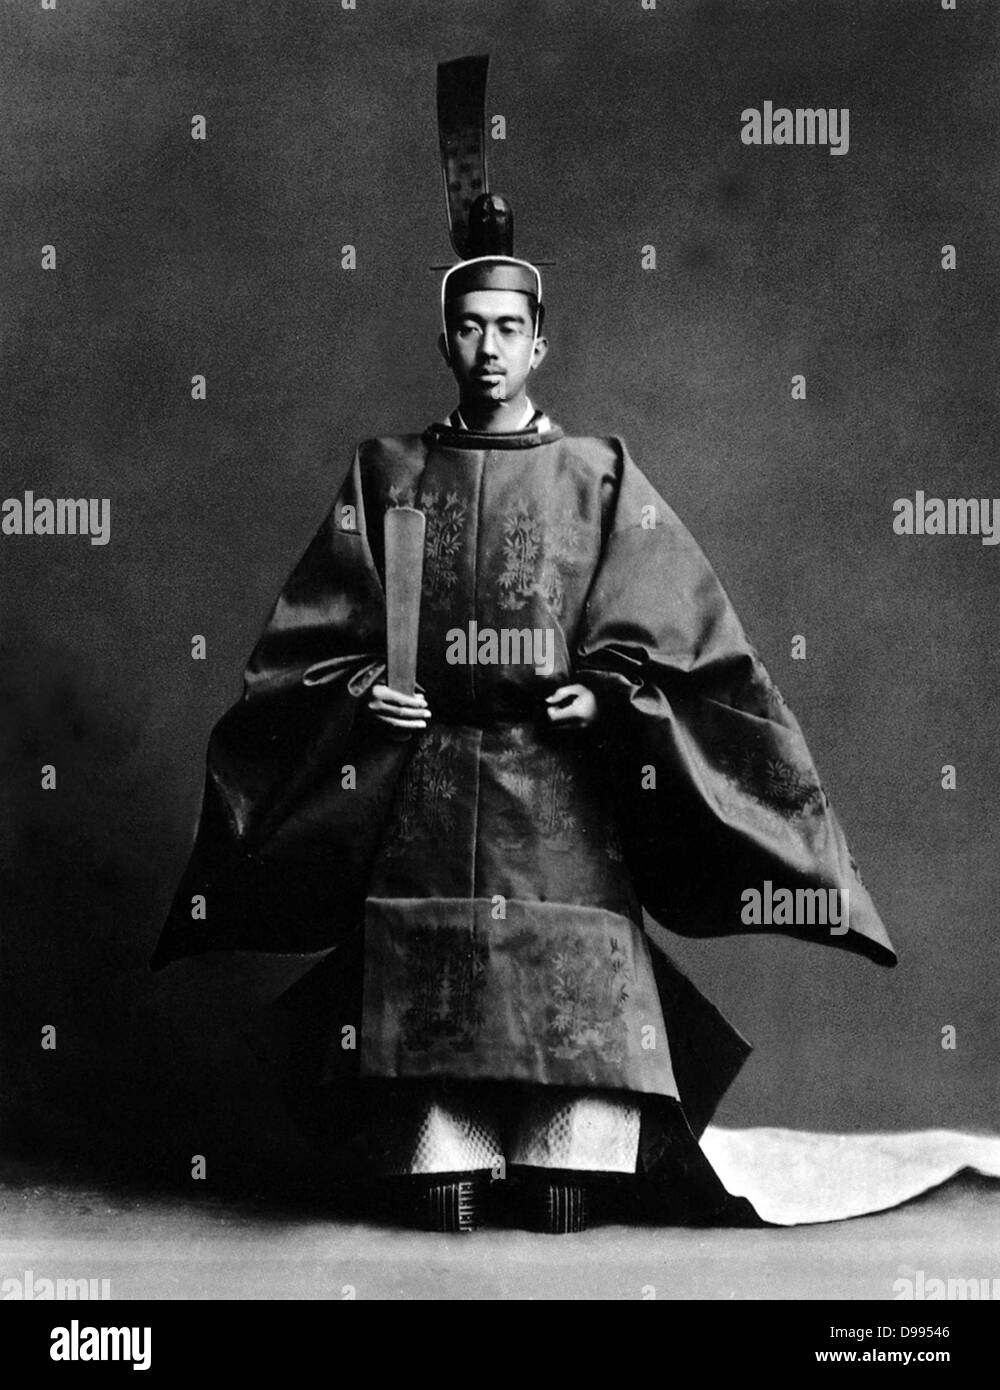 Hirohito (1901-1989) 124th Emperor of Japan 1926-1989. The Emperor during his coronation ceremony, dressed in the robes of the Shinto high priest of, the religion of the state. Stock Photo